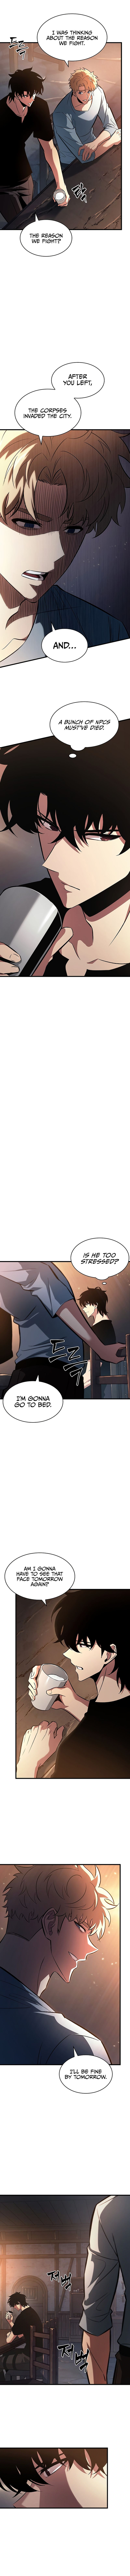 Pick Me Up Chapter 34 page 3